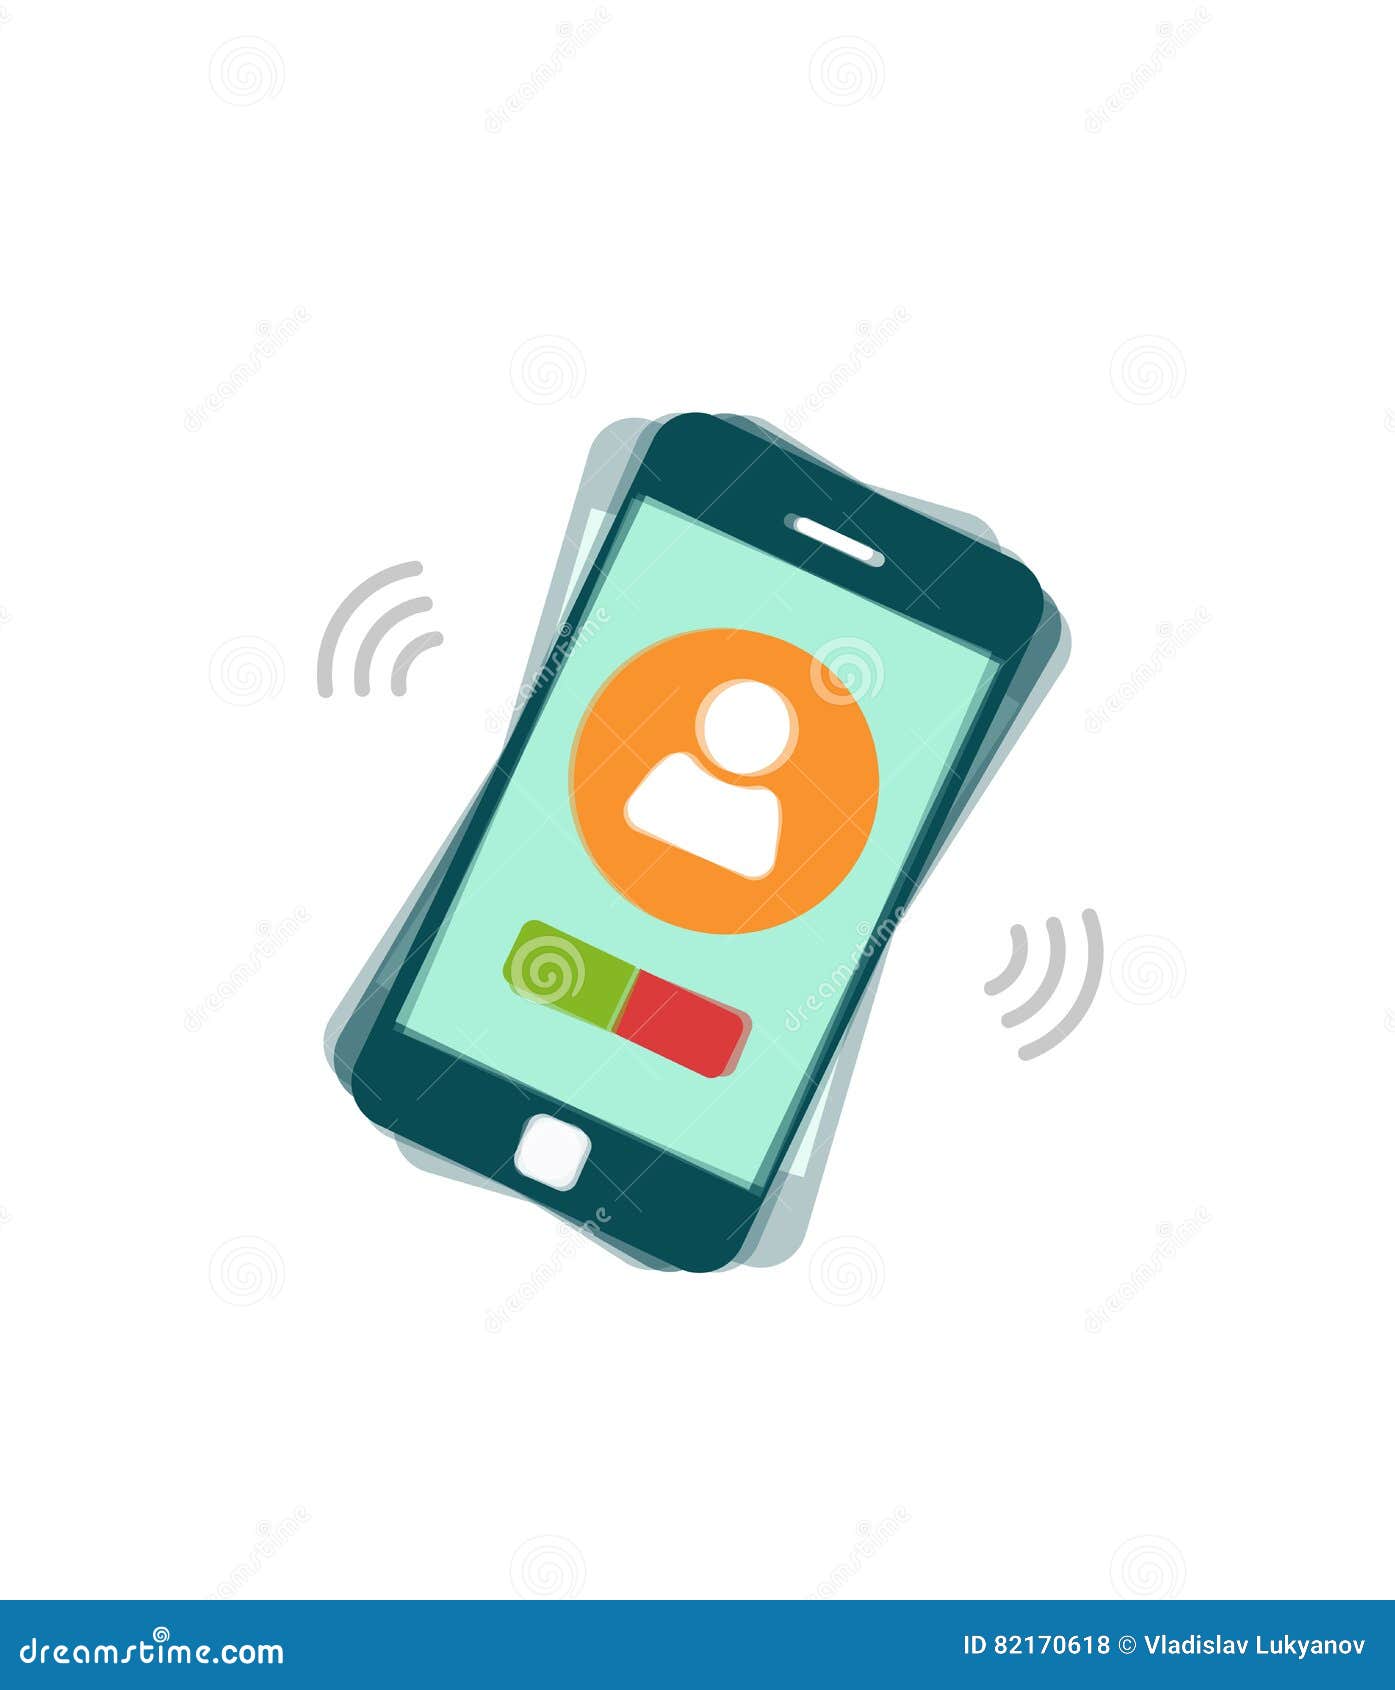  Ringing  Mobile Phone  Vector  Calling Or Vibrating 